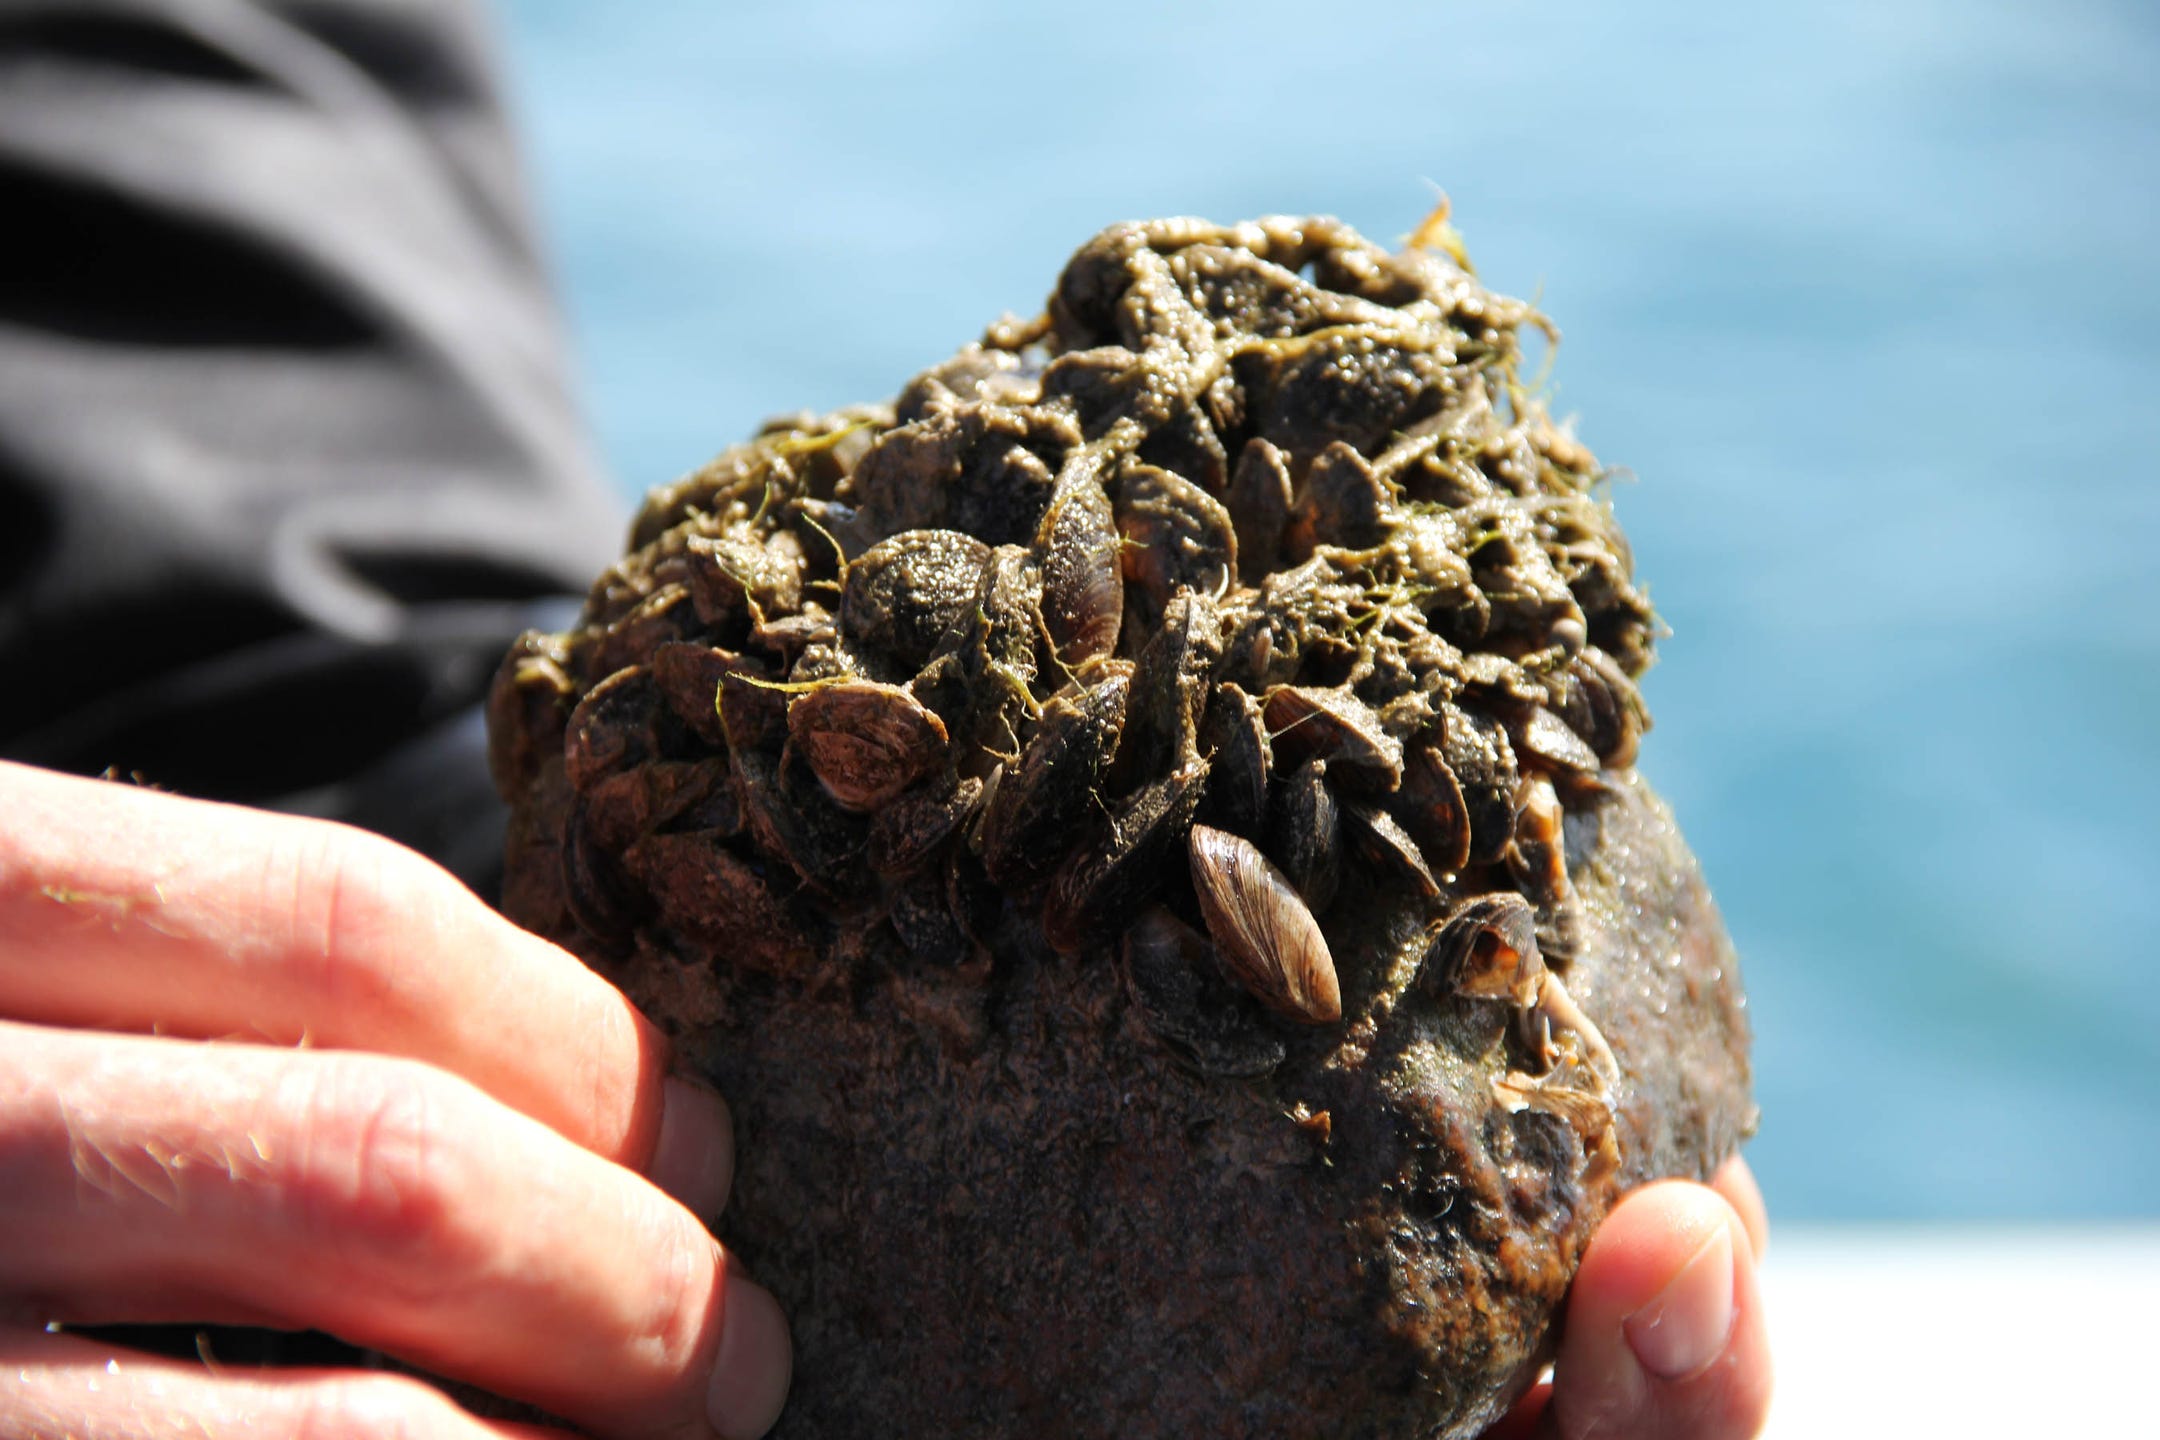 Moss Balls and Zebra Mussels - Great Lakes Research and Education